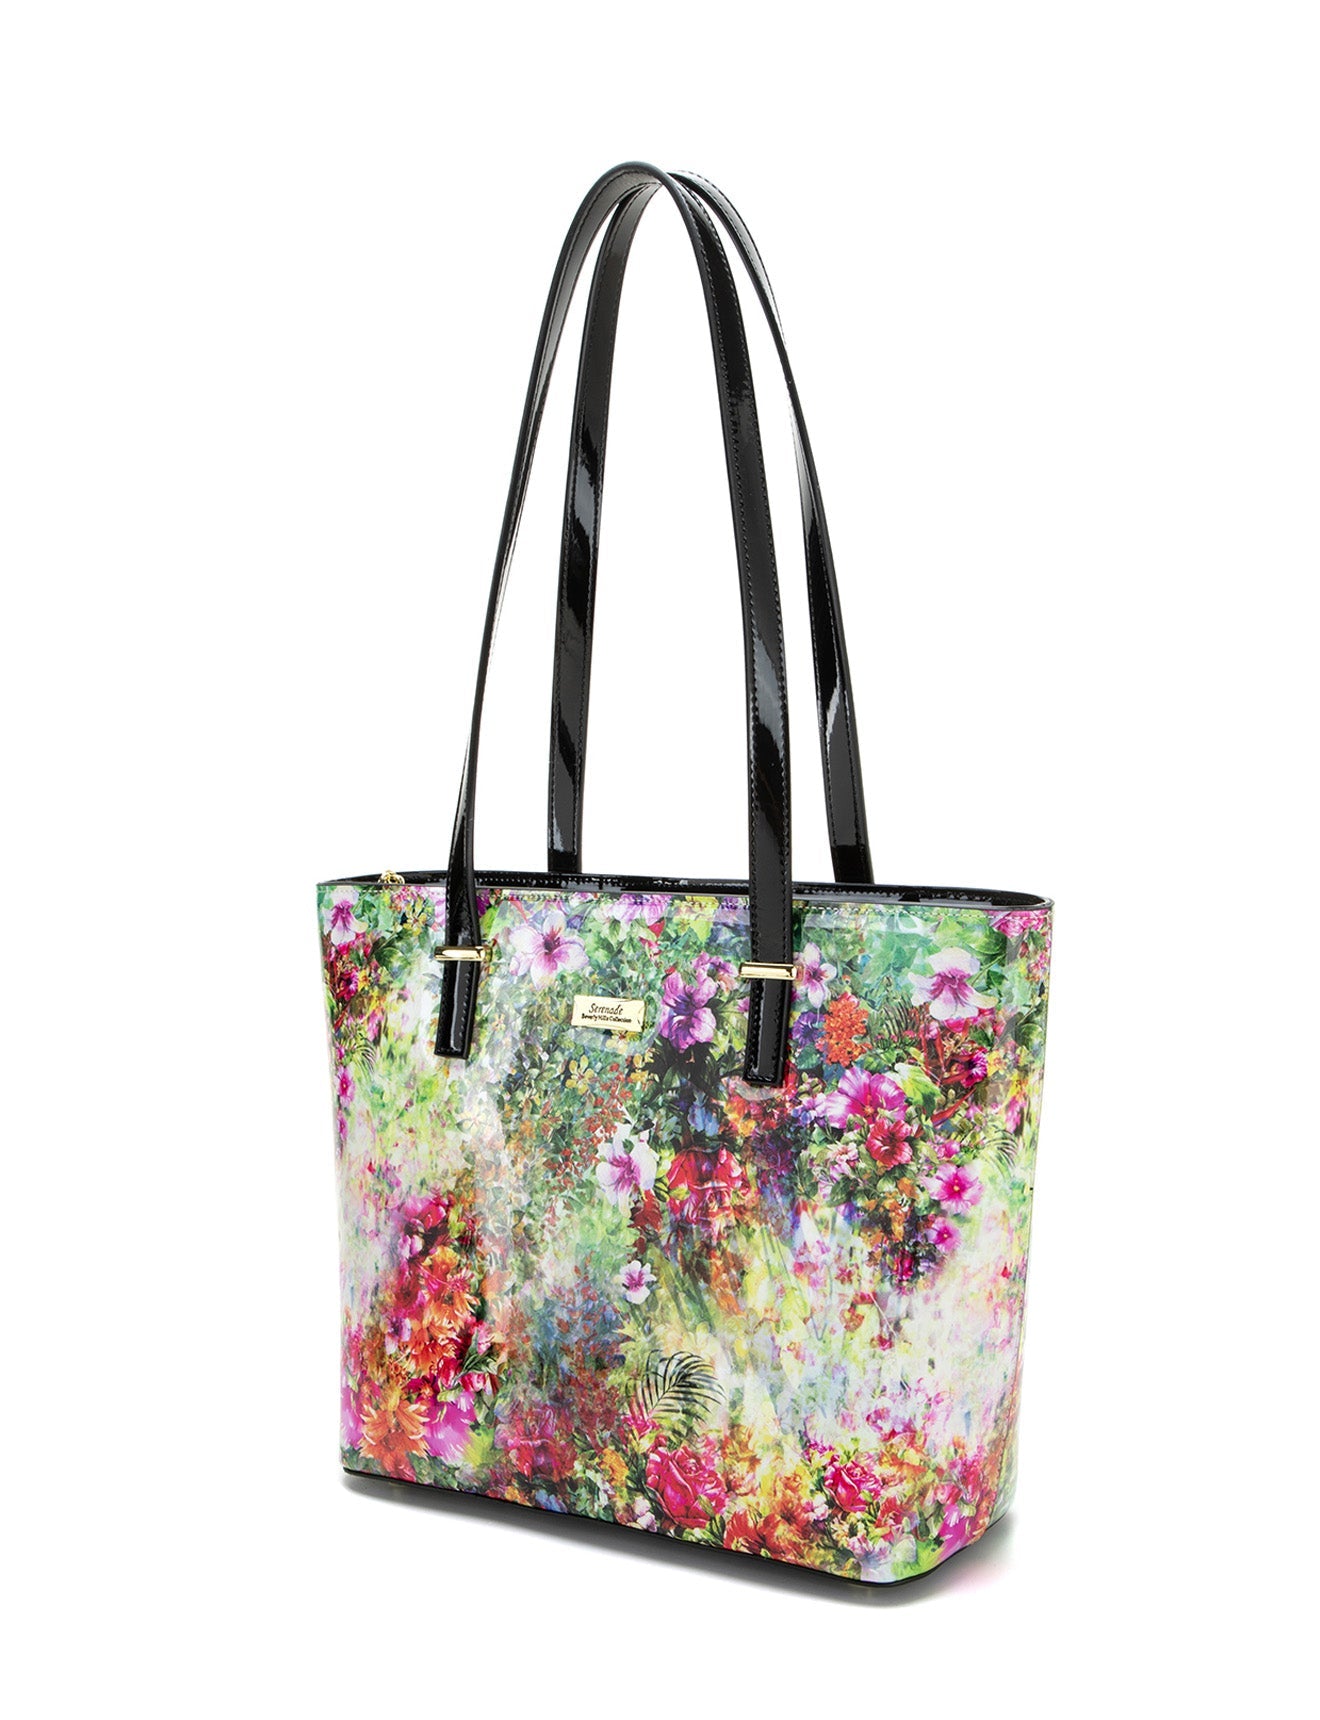 Serenade - SN81-0817 Fiore Large Leather tote - Floral-2